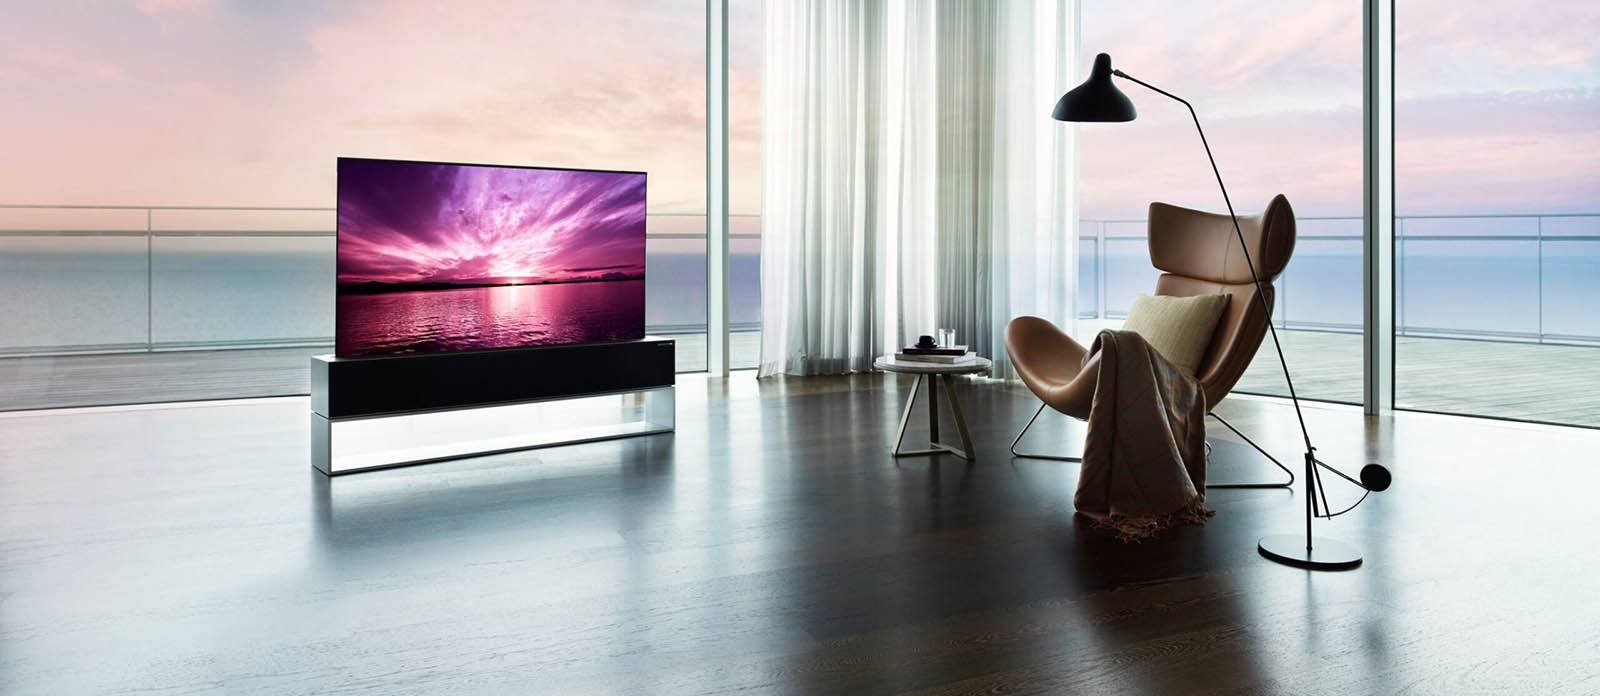 Weekend Wrap-Up: Amazon’s Classic TV Deal, ESPN+ Price Hikes, LG’s $100K TV, and More